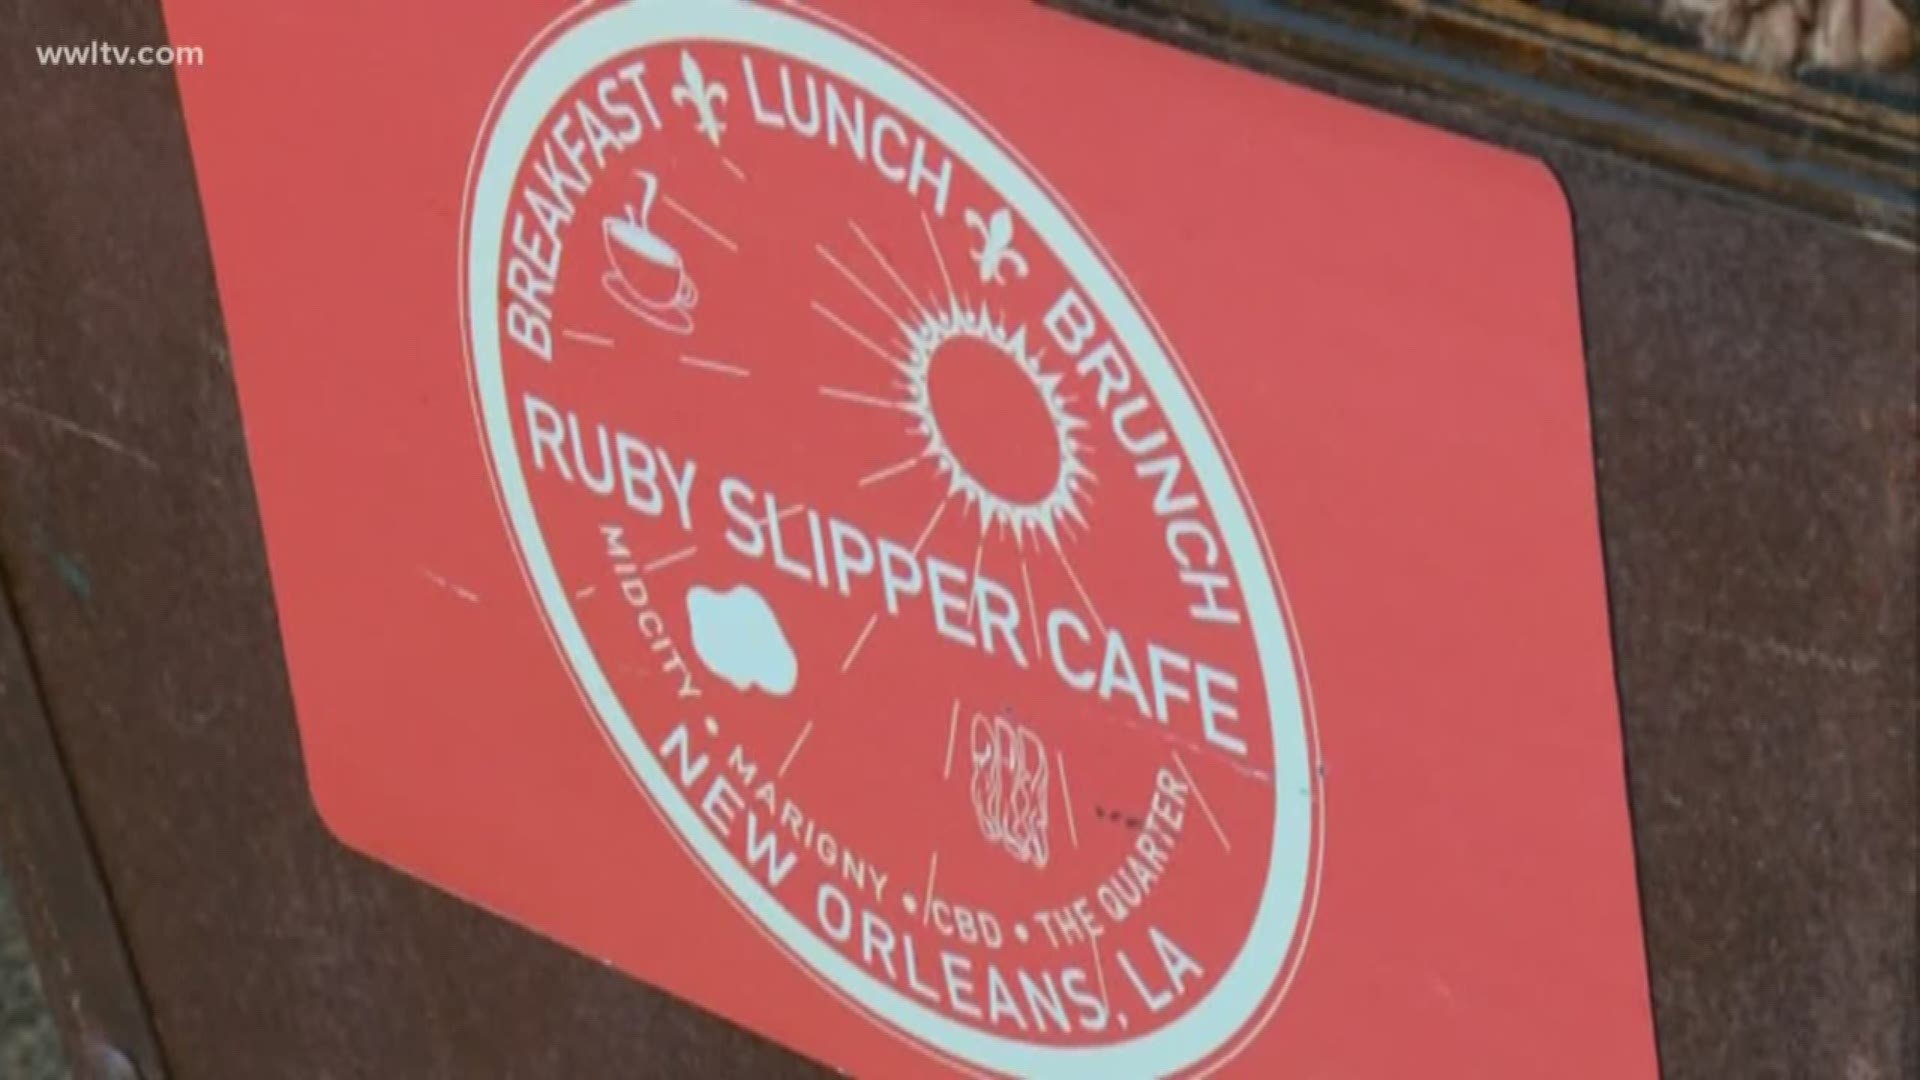 The Ruby Slipper Cafe is offering an entree and a drink to federal employees and their families during the government shutdown.